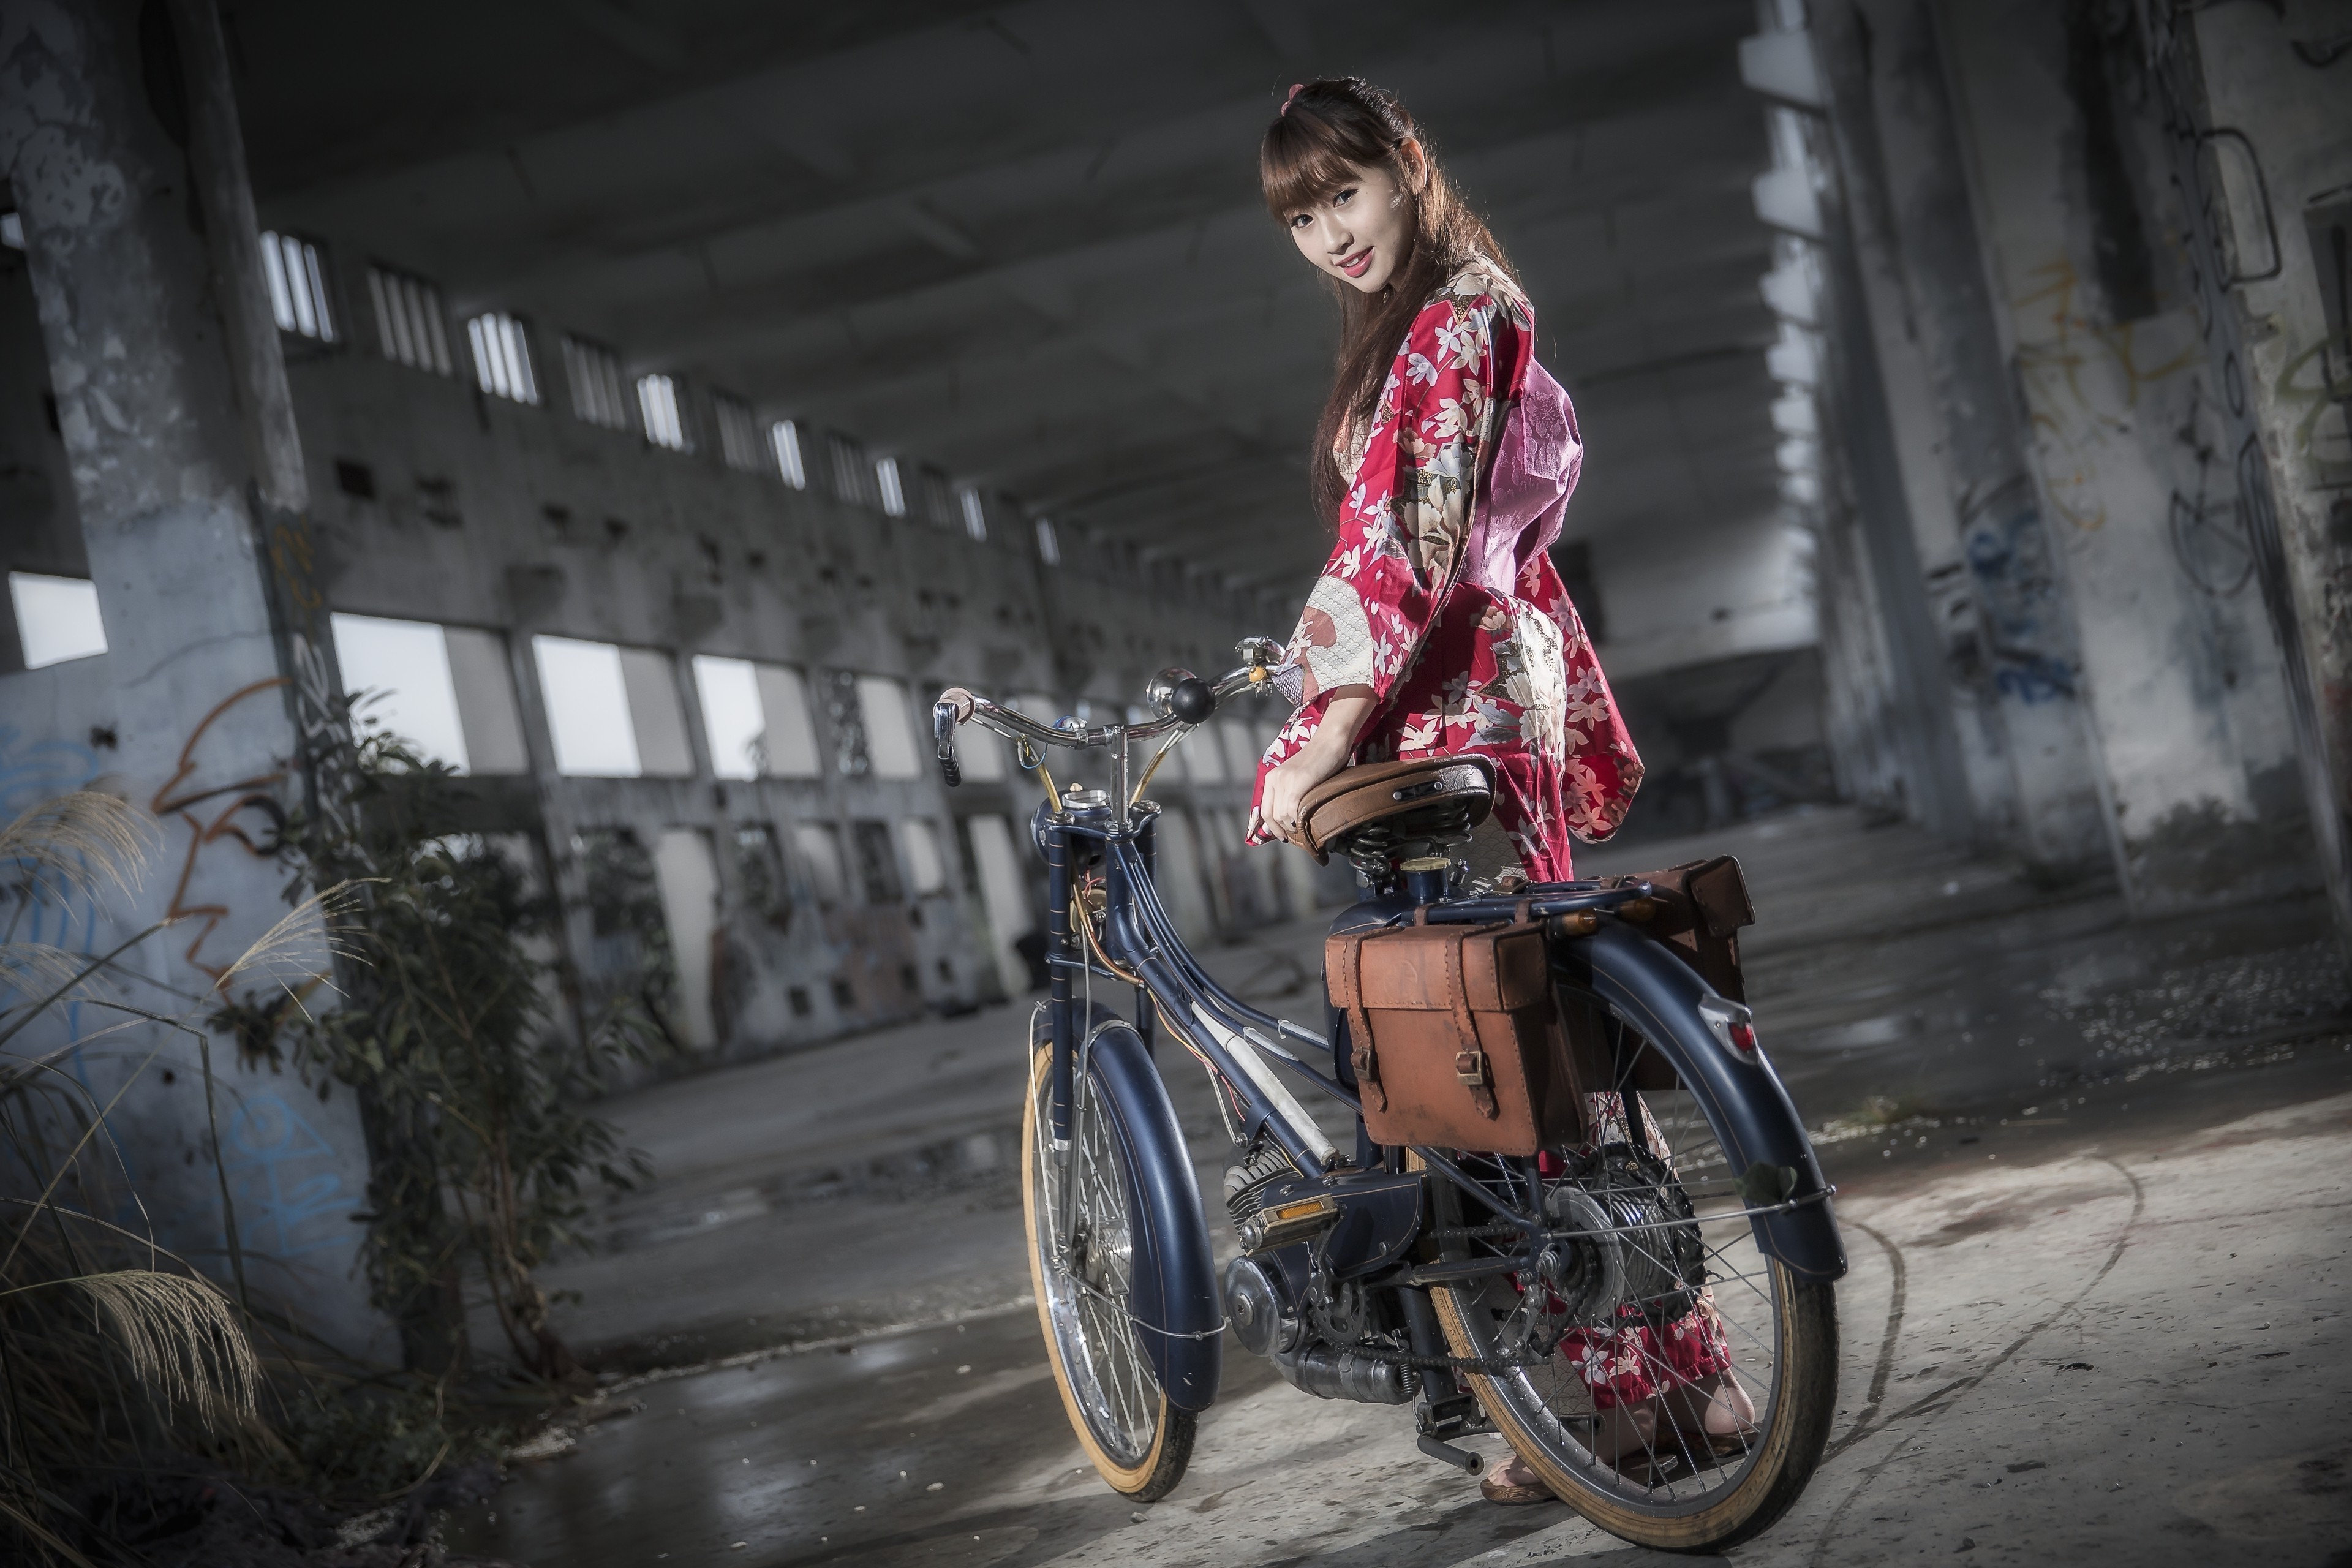 Wallpaper, women, model, street, bicycle, Asian, motorcycle, vehicle, road, cycling, sports equipment, mountain bike, extreme sport, cycle sport, 3840x2560 px 3840x2560